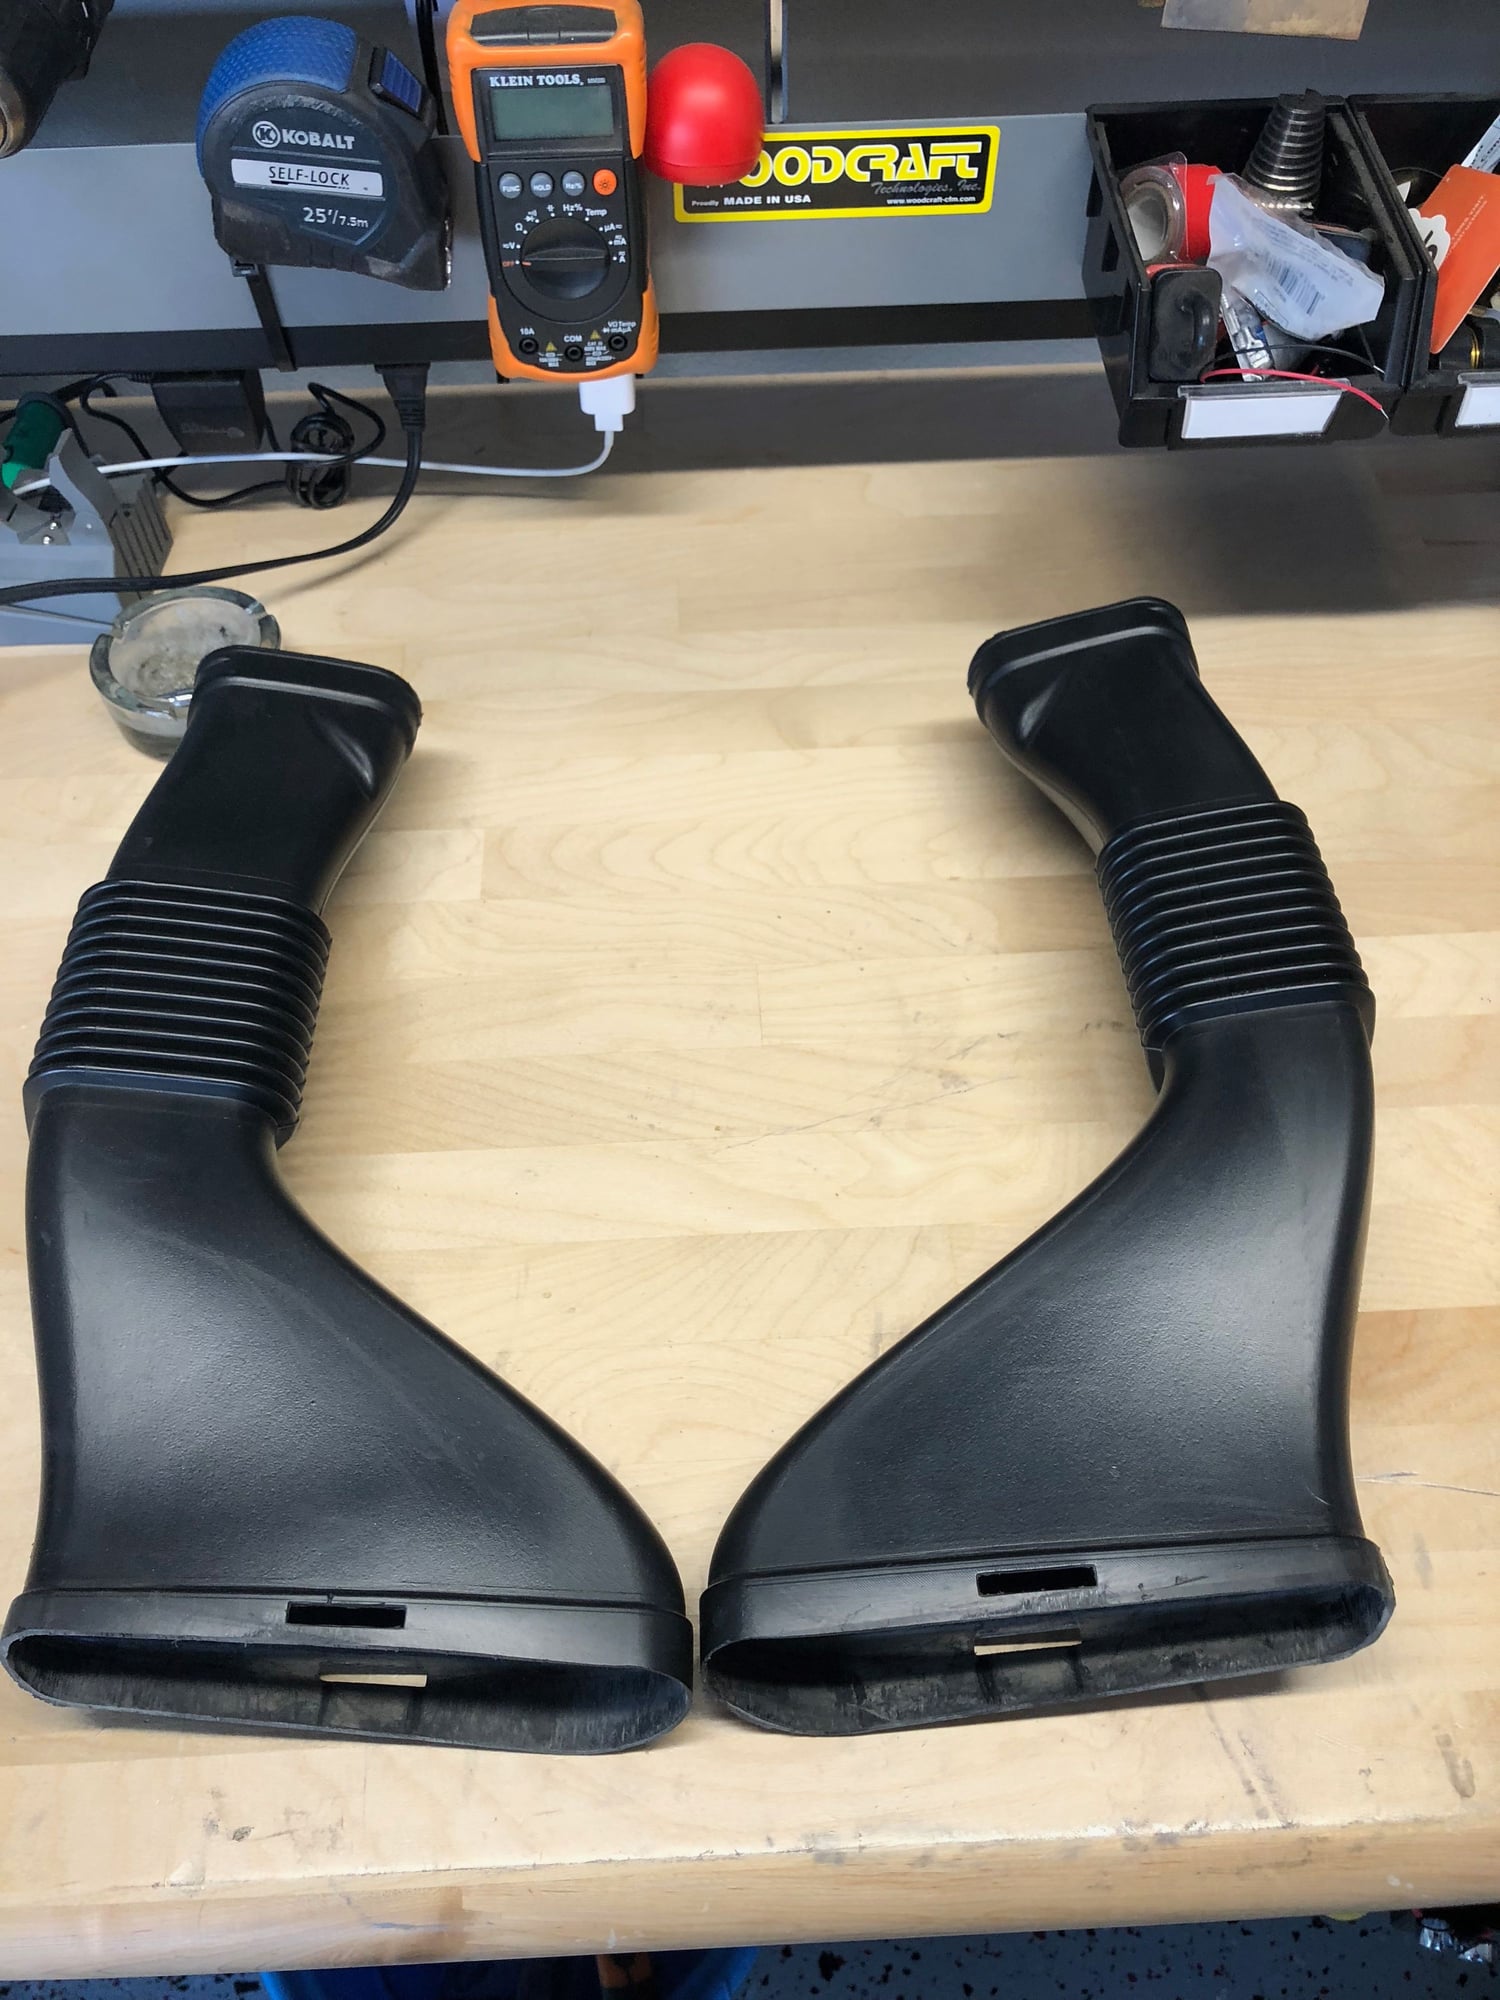 Engine - Intake/Fuel - OEM C63 Intake ducts - Used - 2012 to 2015 Mercedes-Benz C63 AMG - Riverside, CA 92507, United States